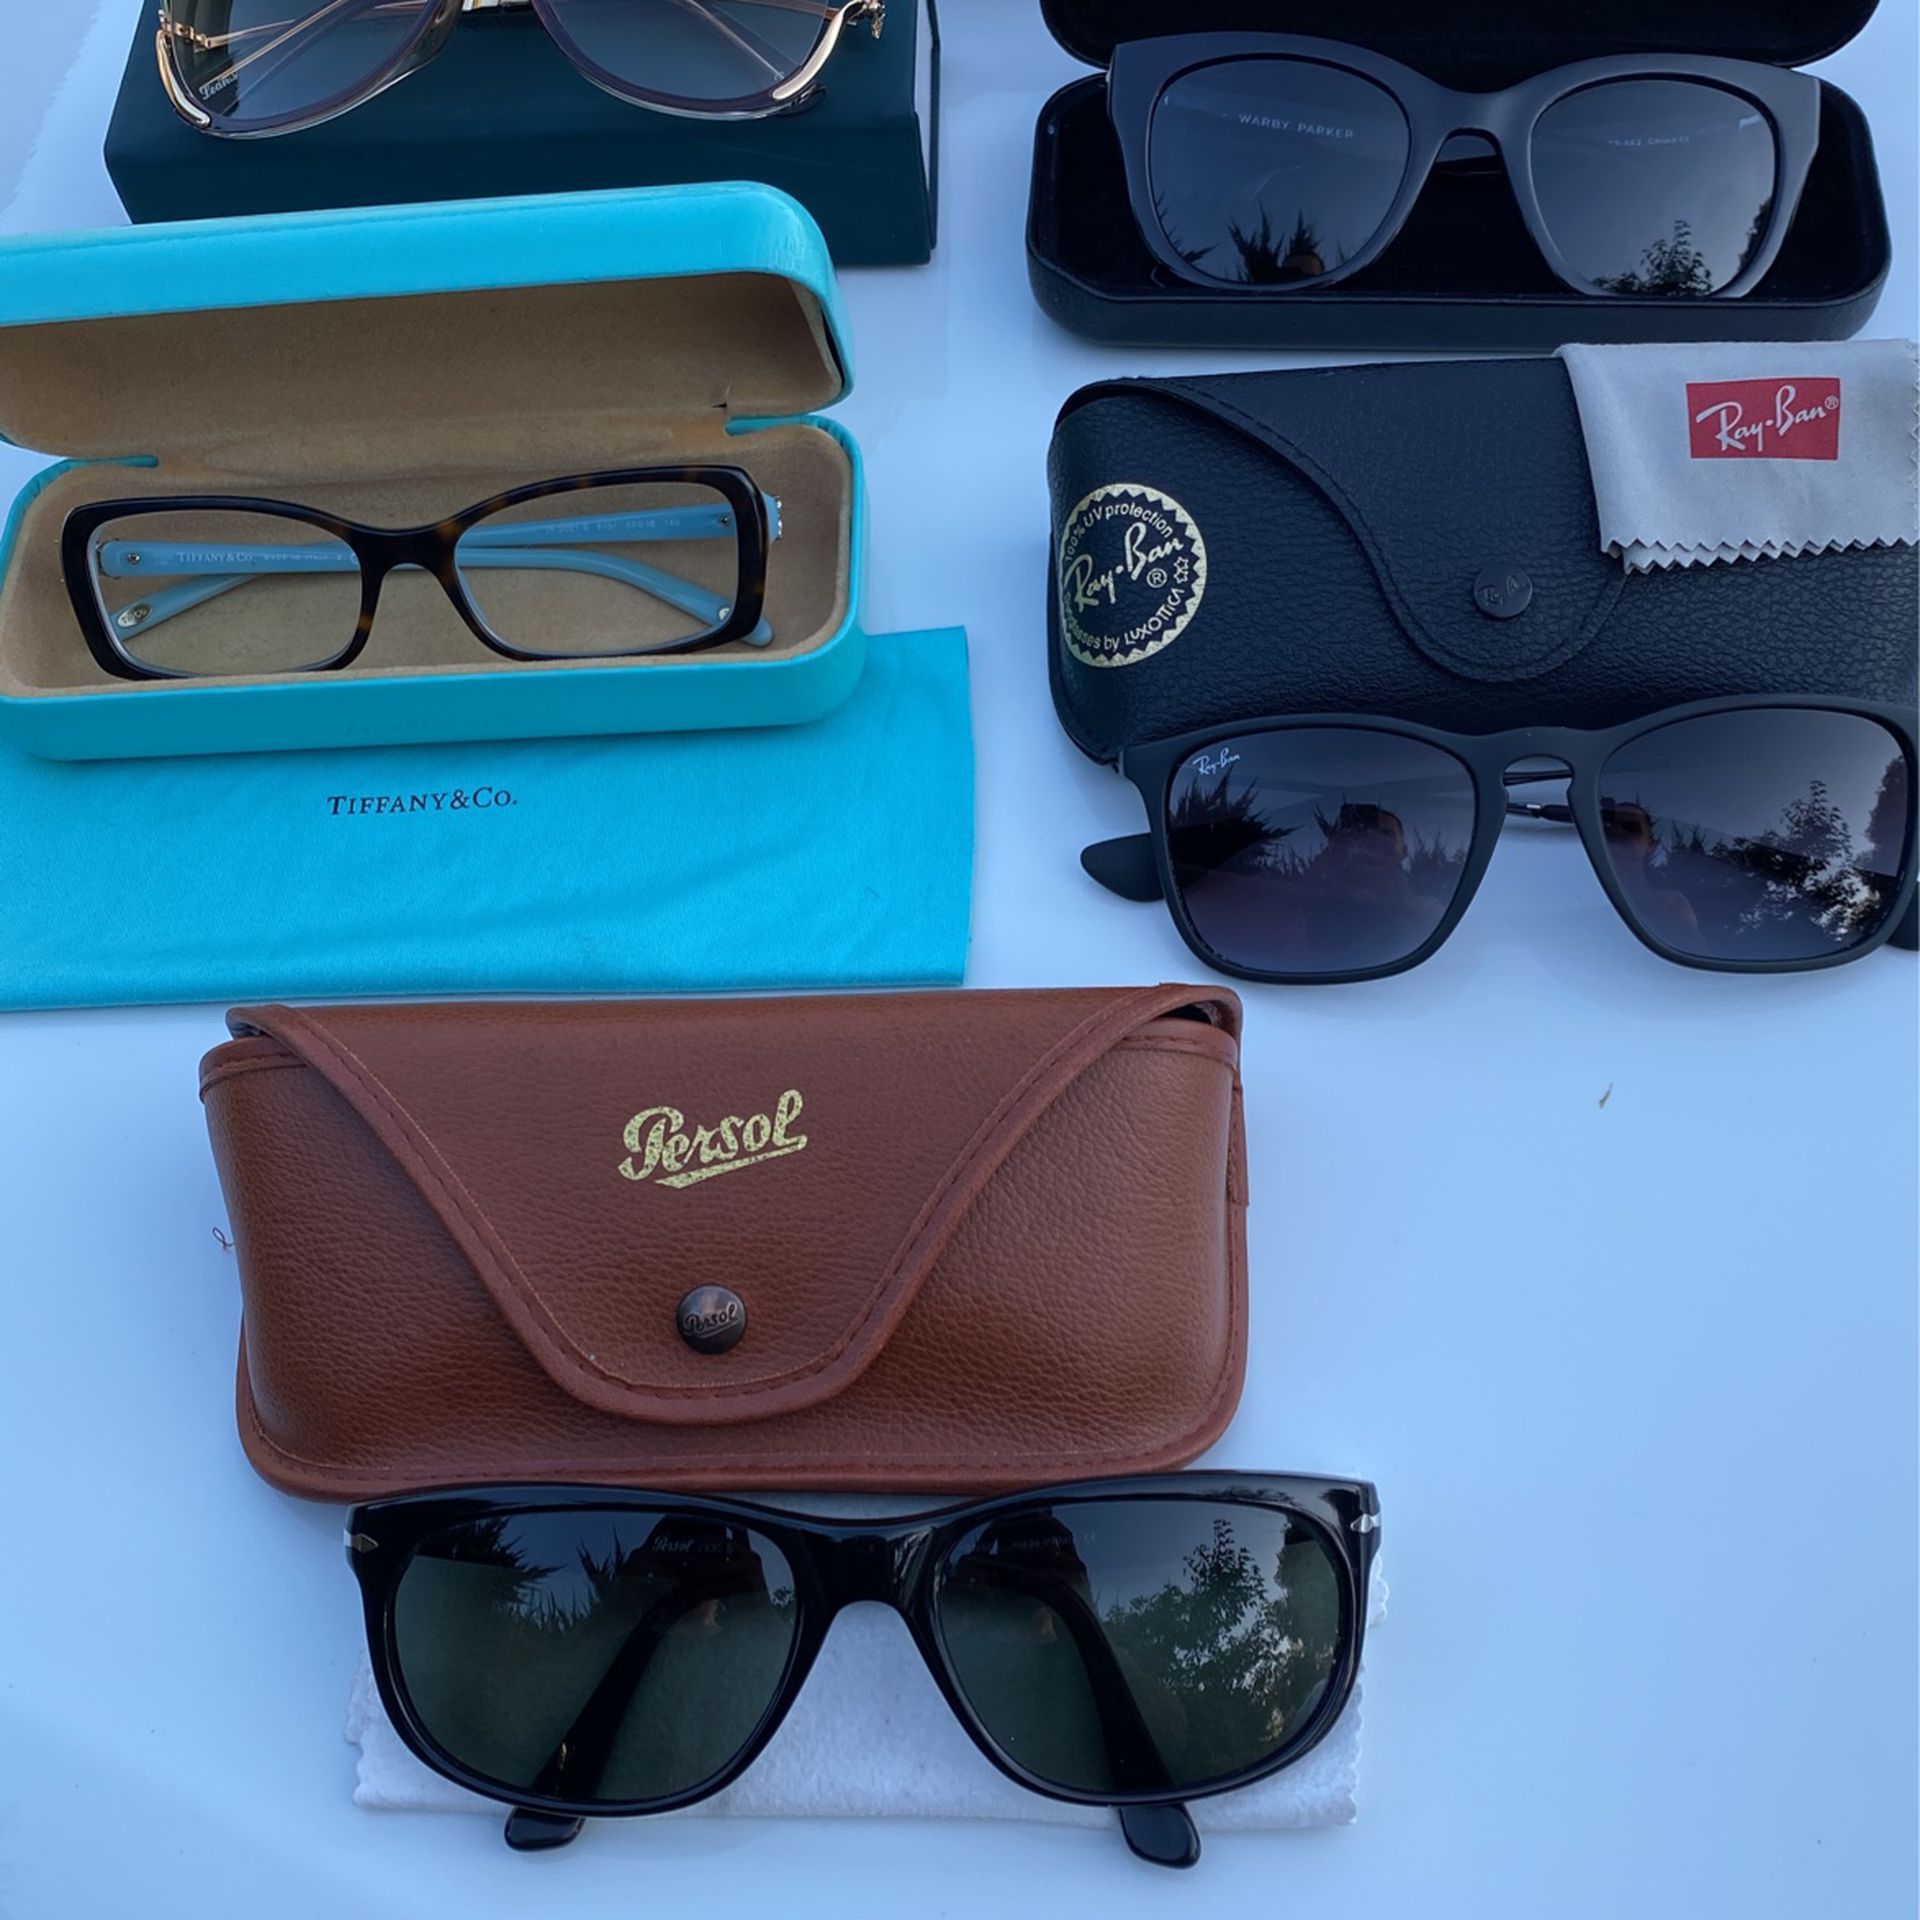 Six Pairs Of High Designer Sunglasses All Original Tiffany, Rayban, Persol, Warby Parker, +